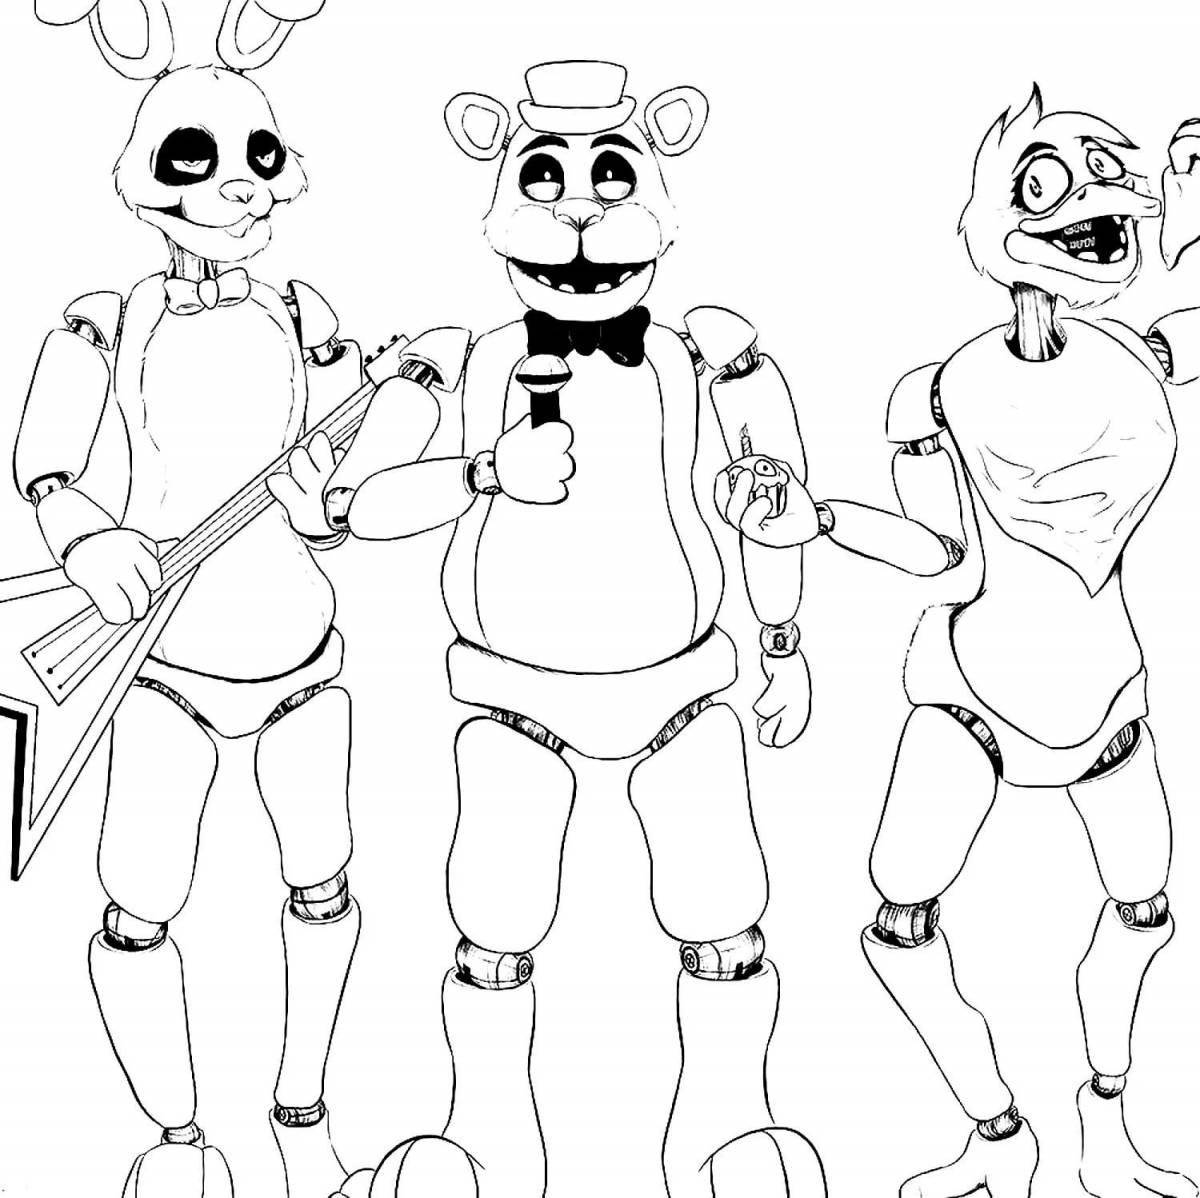 Animated fnaf 8 coloring book